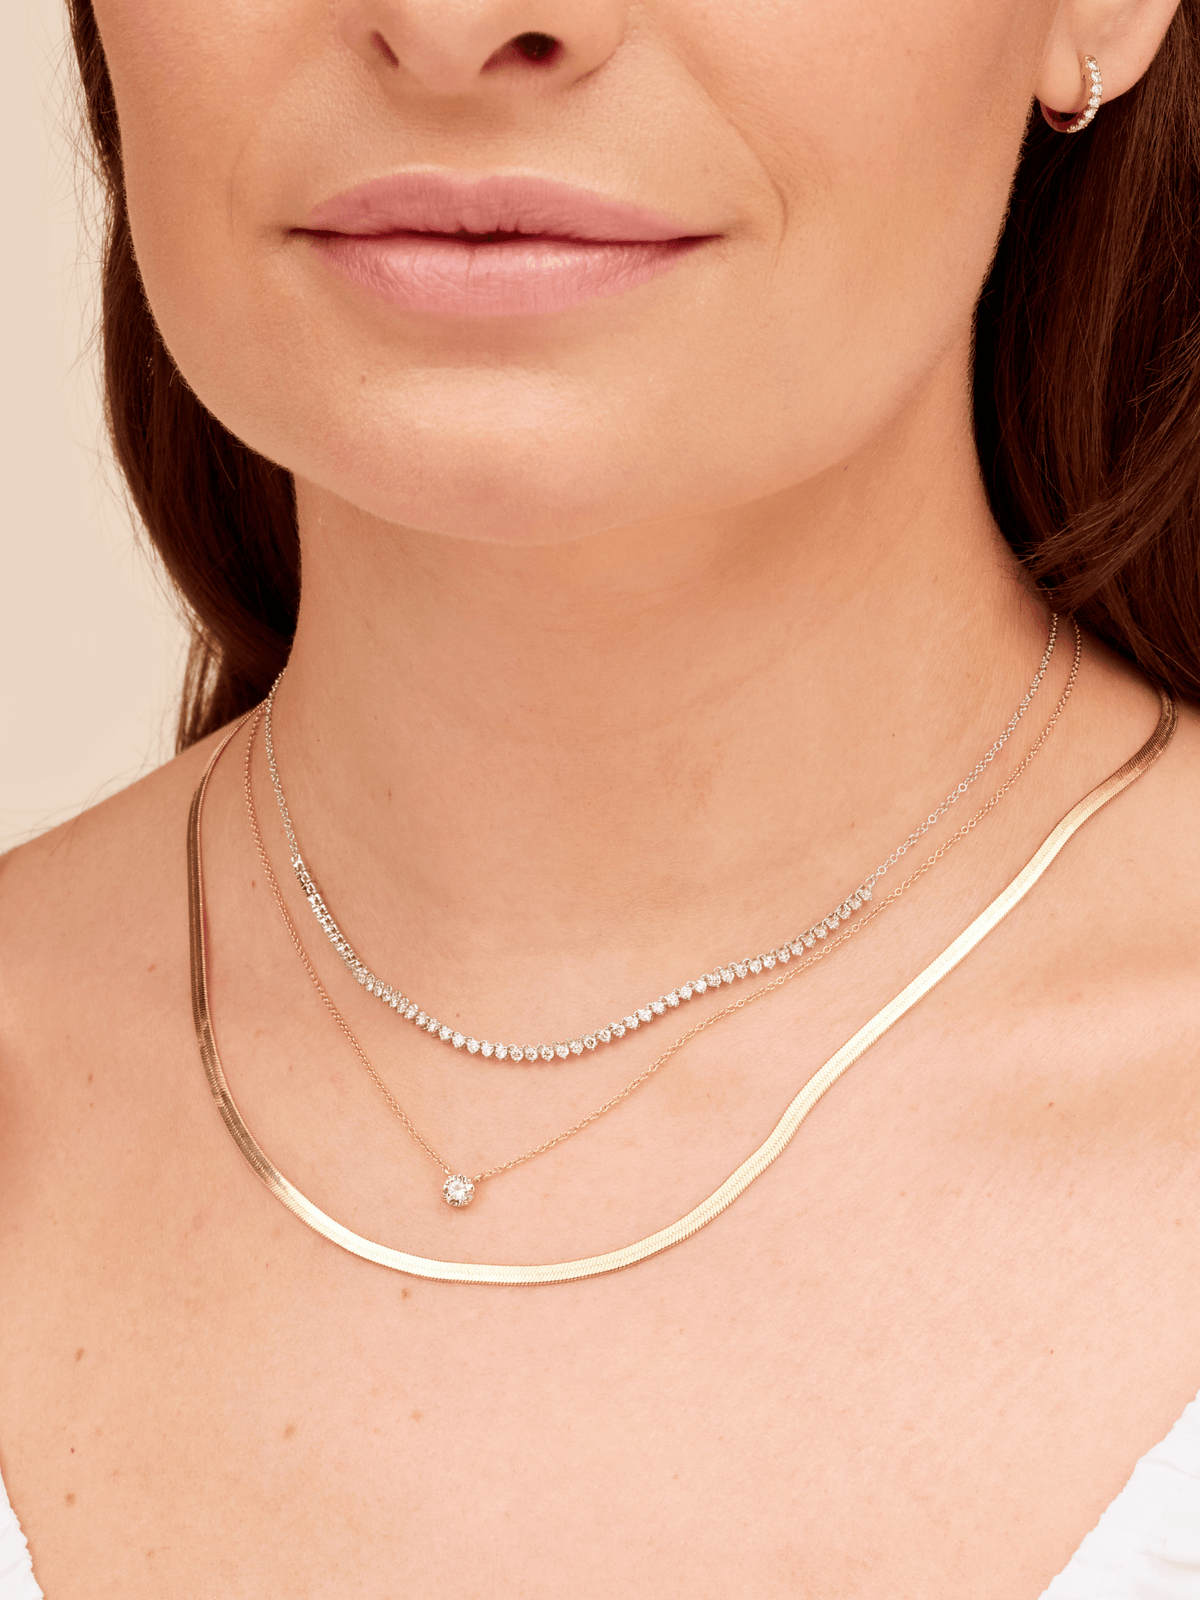 Snake chain layered with diamond tennis chain necklace and single diamond necklace